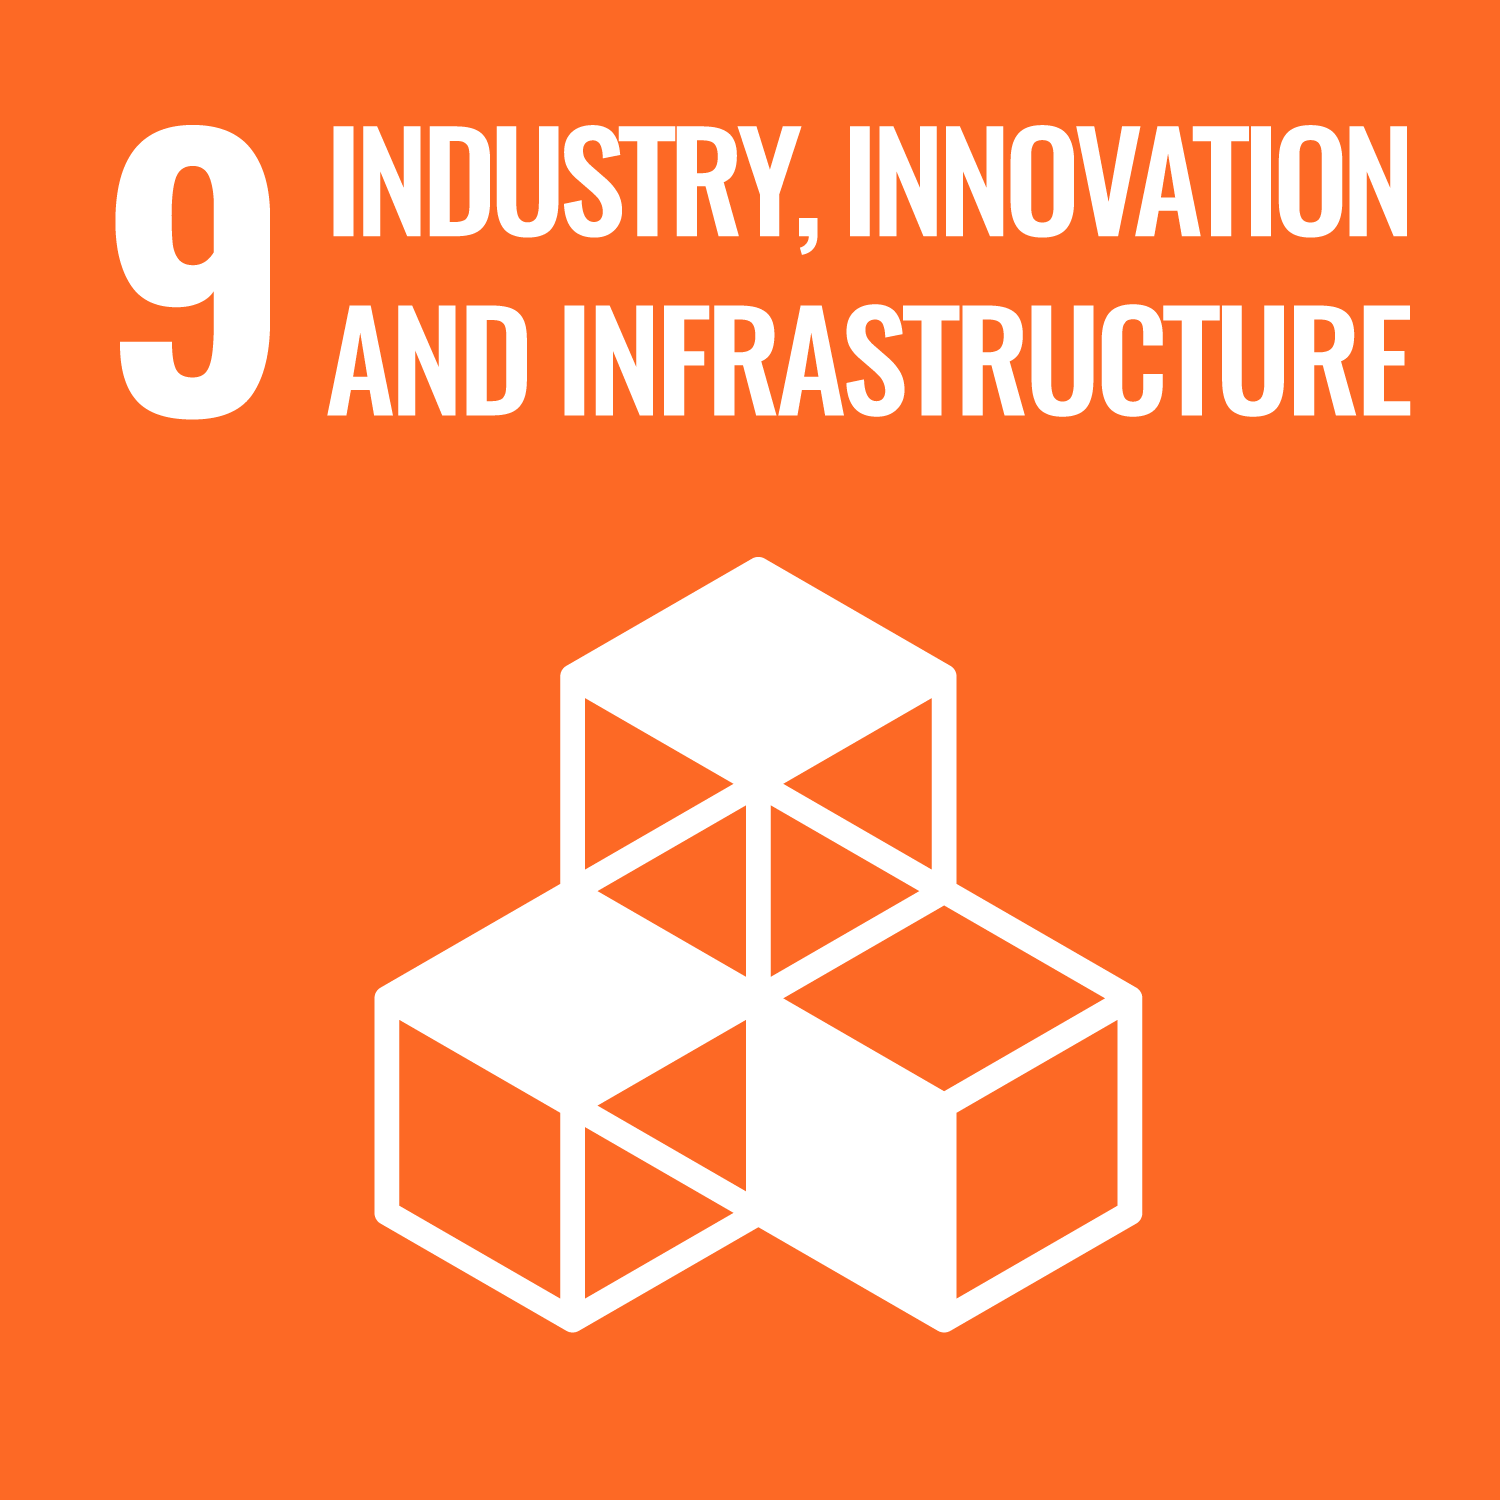 Sustainable Development Goal #09 (Industry, Innocation and Infastructure)